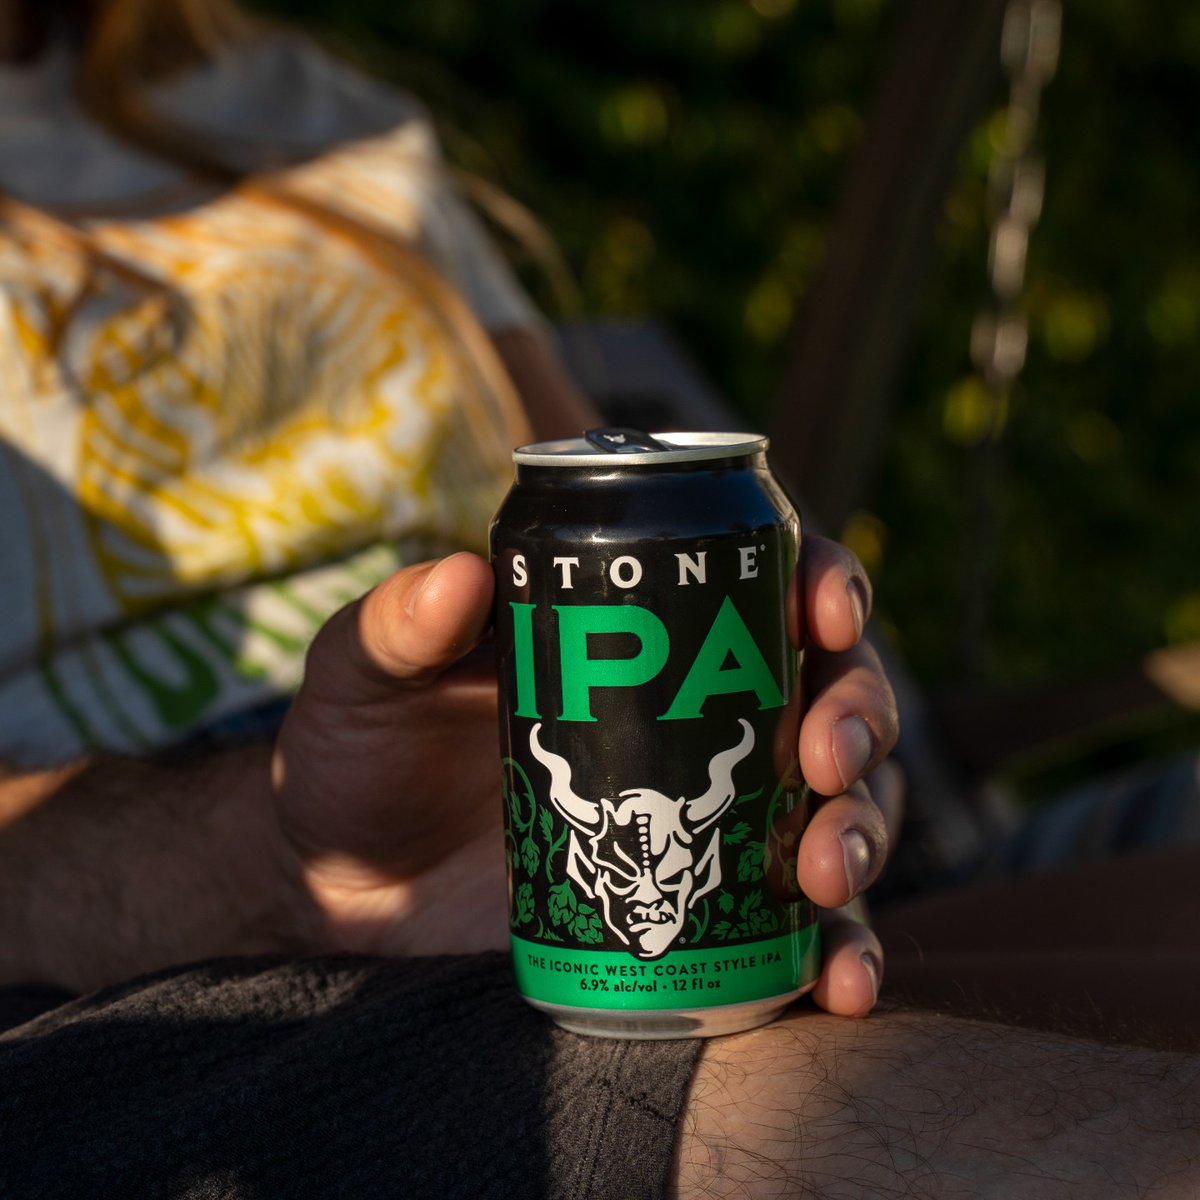 Originally brewed to celebrate our first anniversary in 1997, Stone IPA was an immediate hit and soon became the flagship beer of our young brewery, as well as one of the most well-respected and best-selling IPAs in the country. Find it near you with brnw.ch/21wJCND!